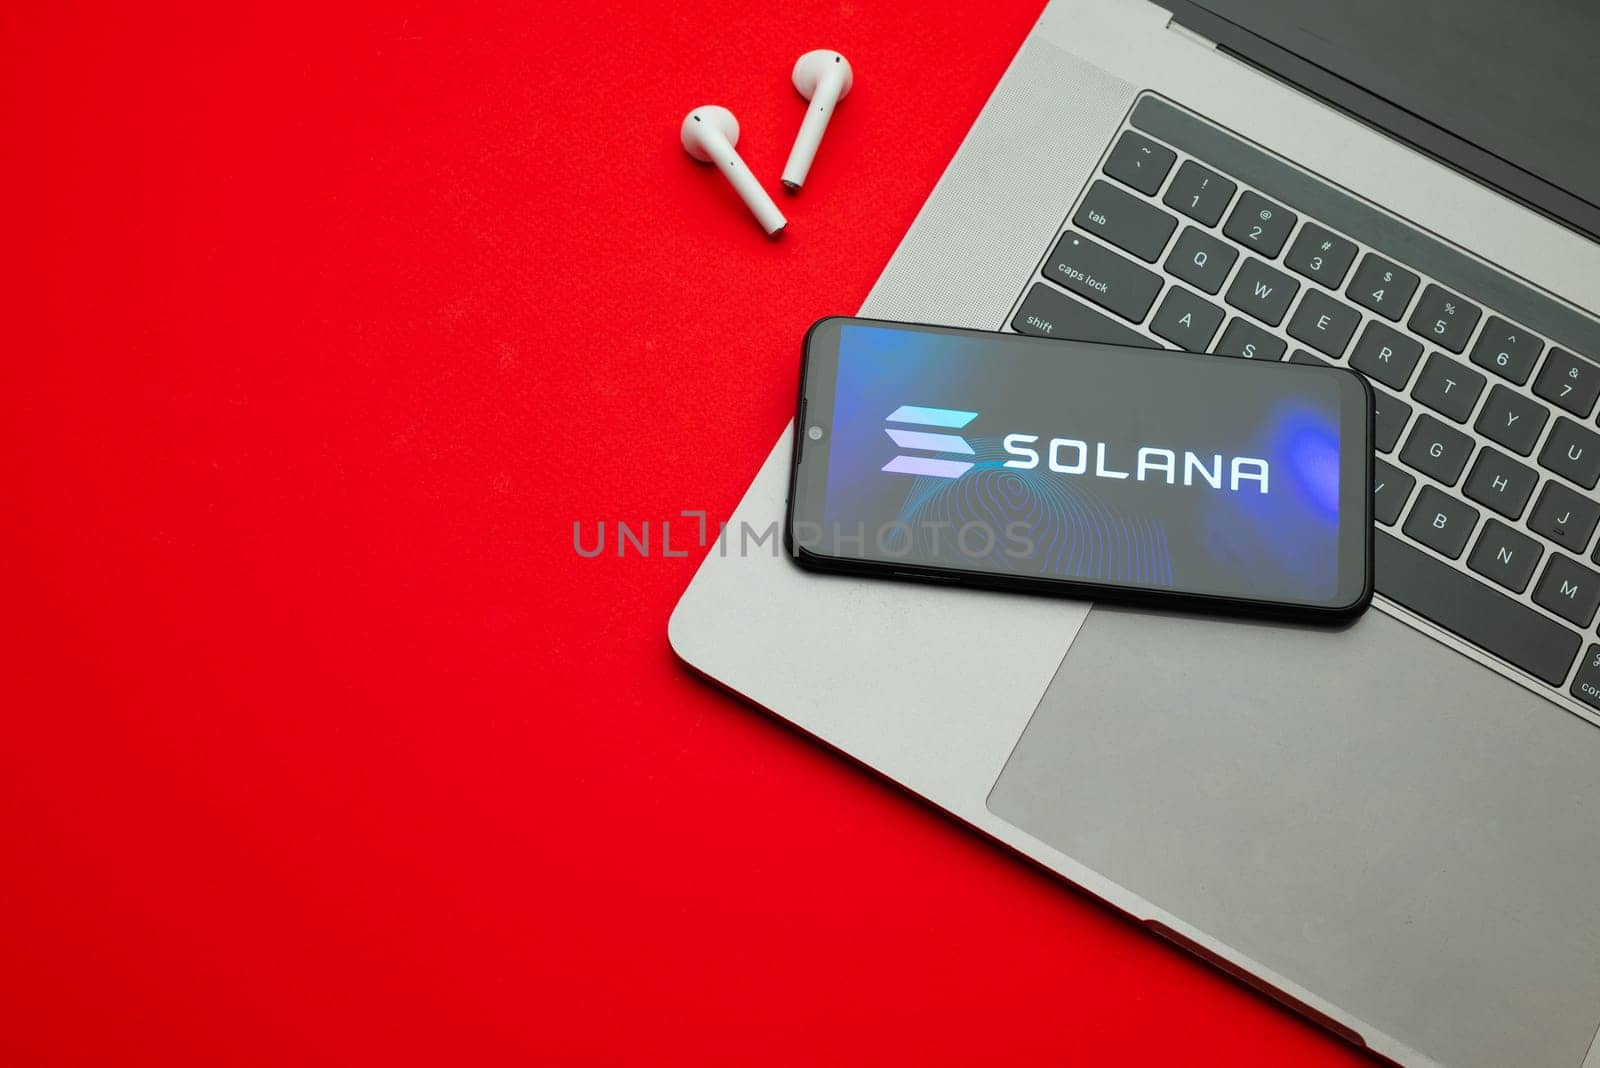 Tula, Russia - Jan 10, 2022: Solana logo on smartphone screen on red background.